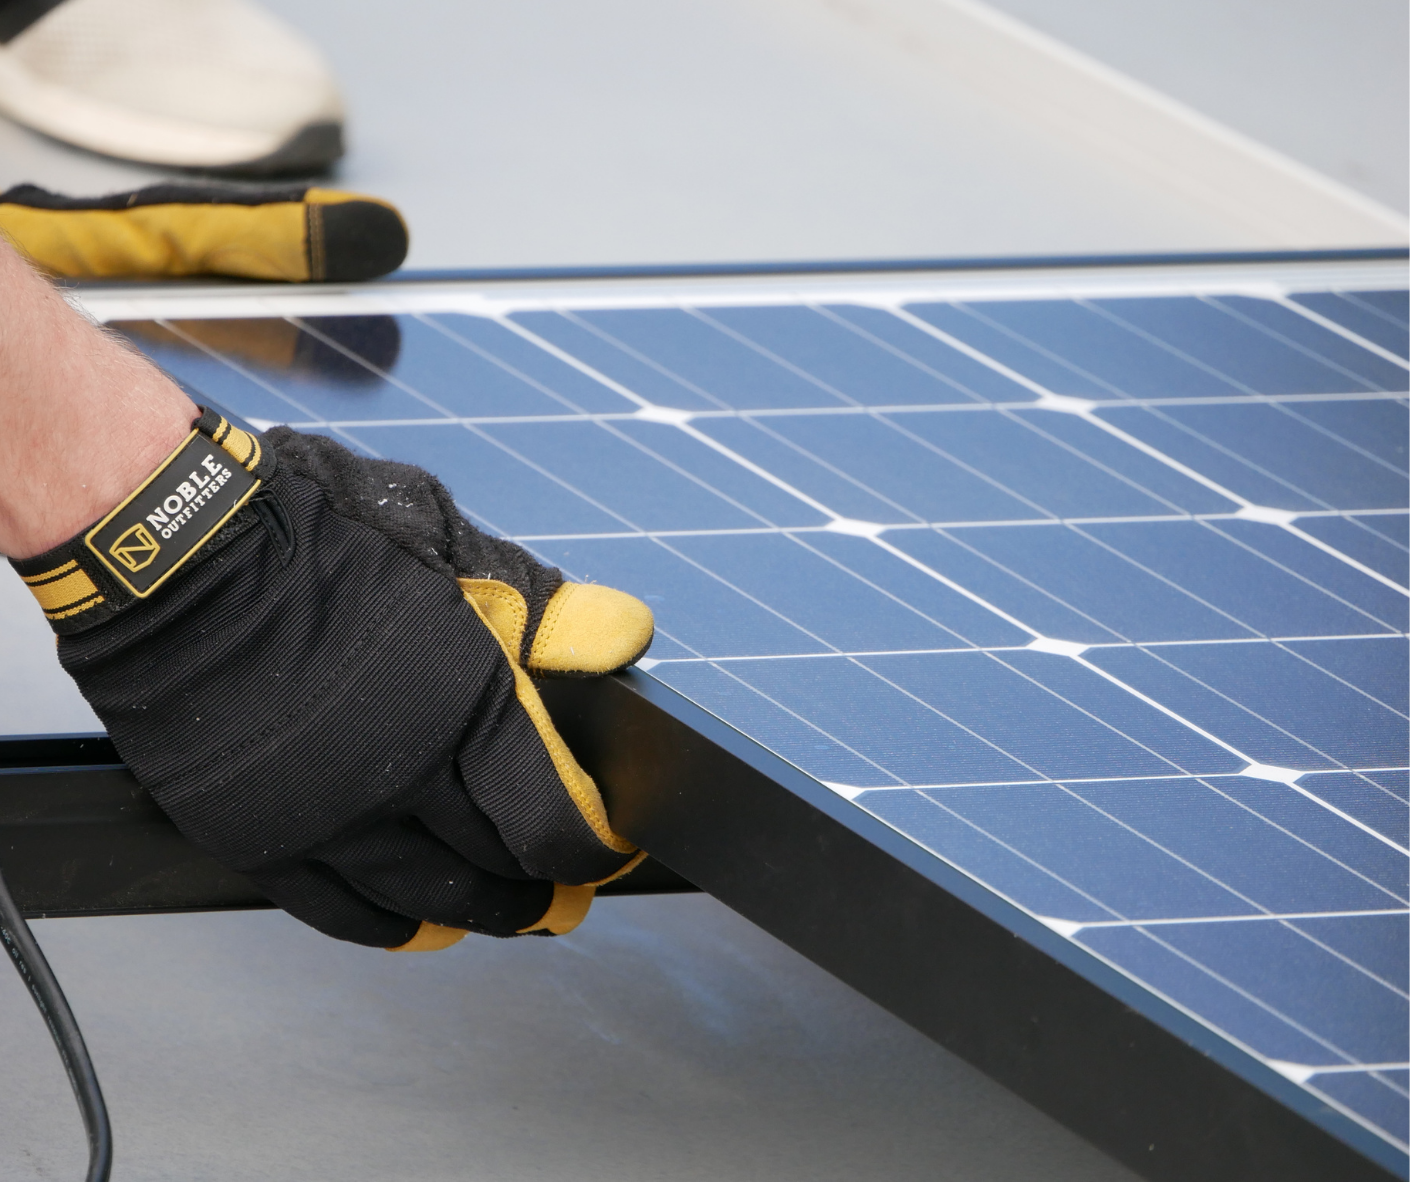 A gloved hand holds a solar panel